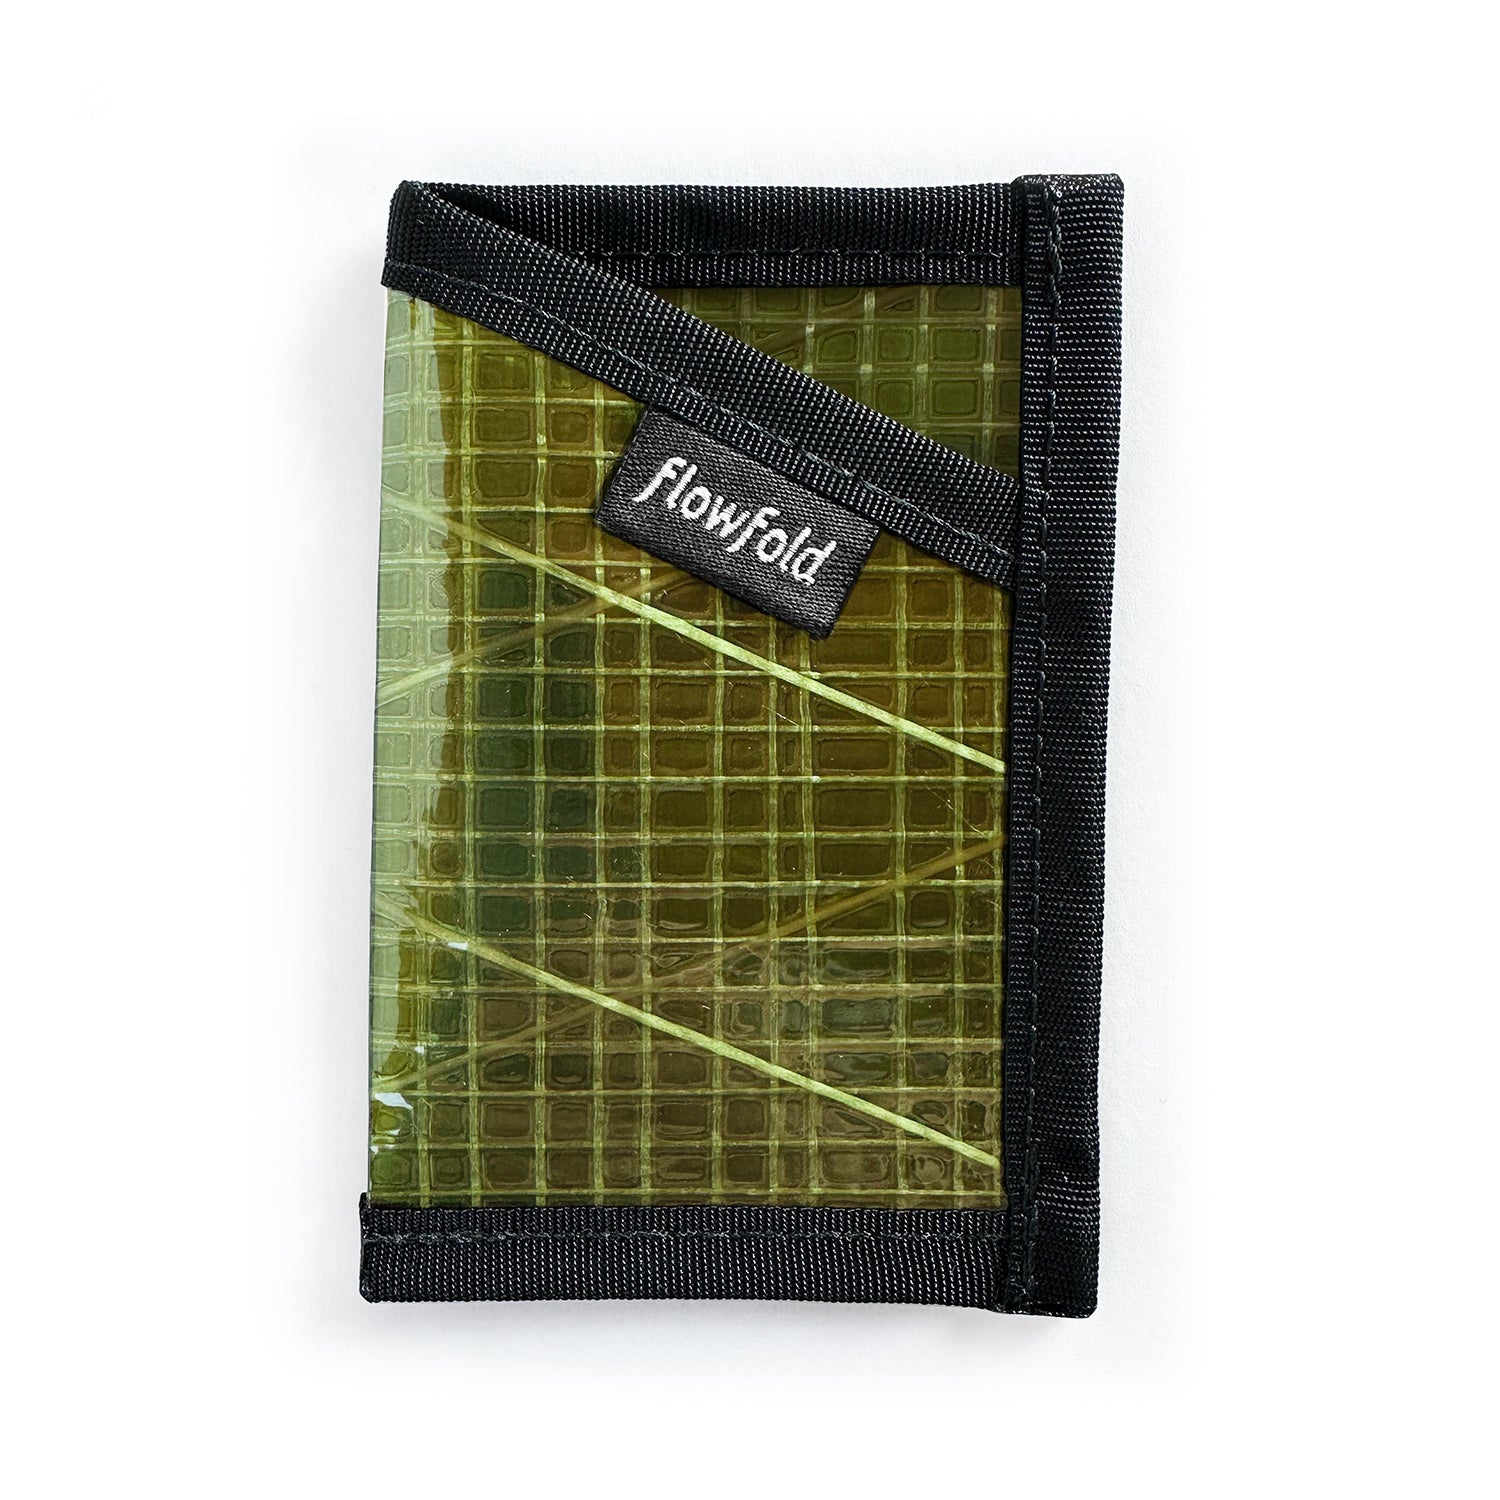 Flowfold - Minimalist Wallets & Bags of Sustainable Recycled Materials